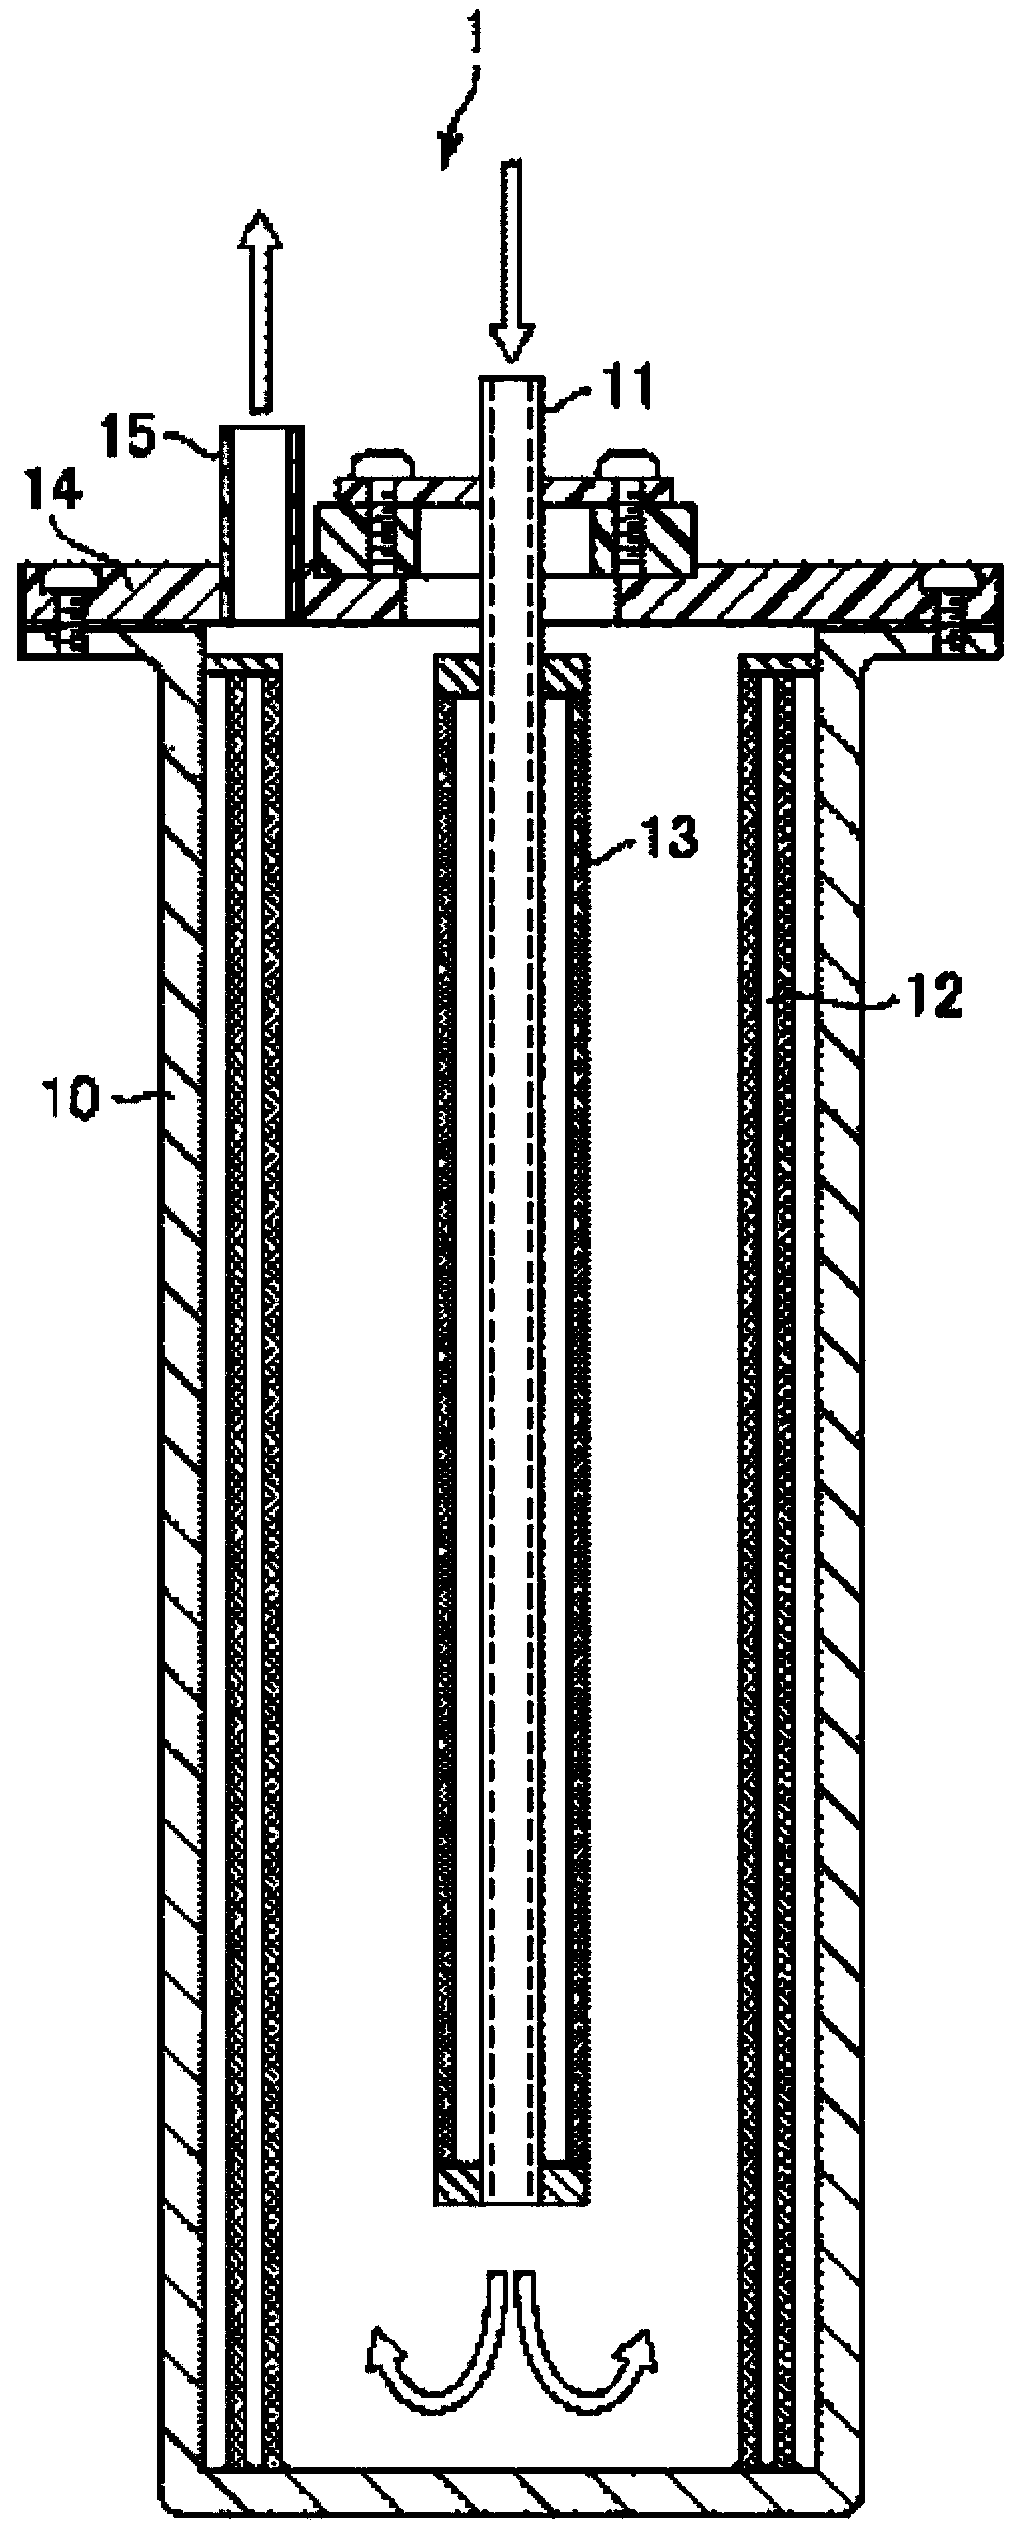 Precious metal recovery device and recovery method